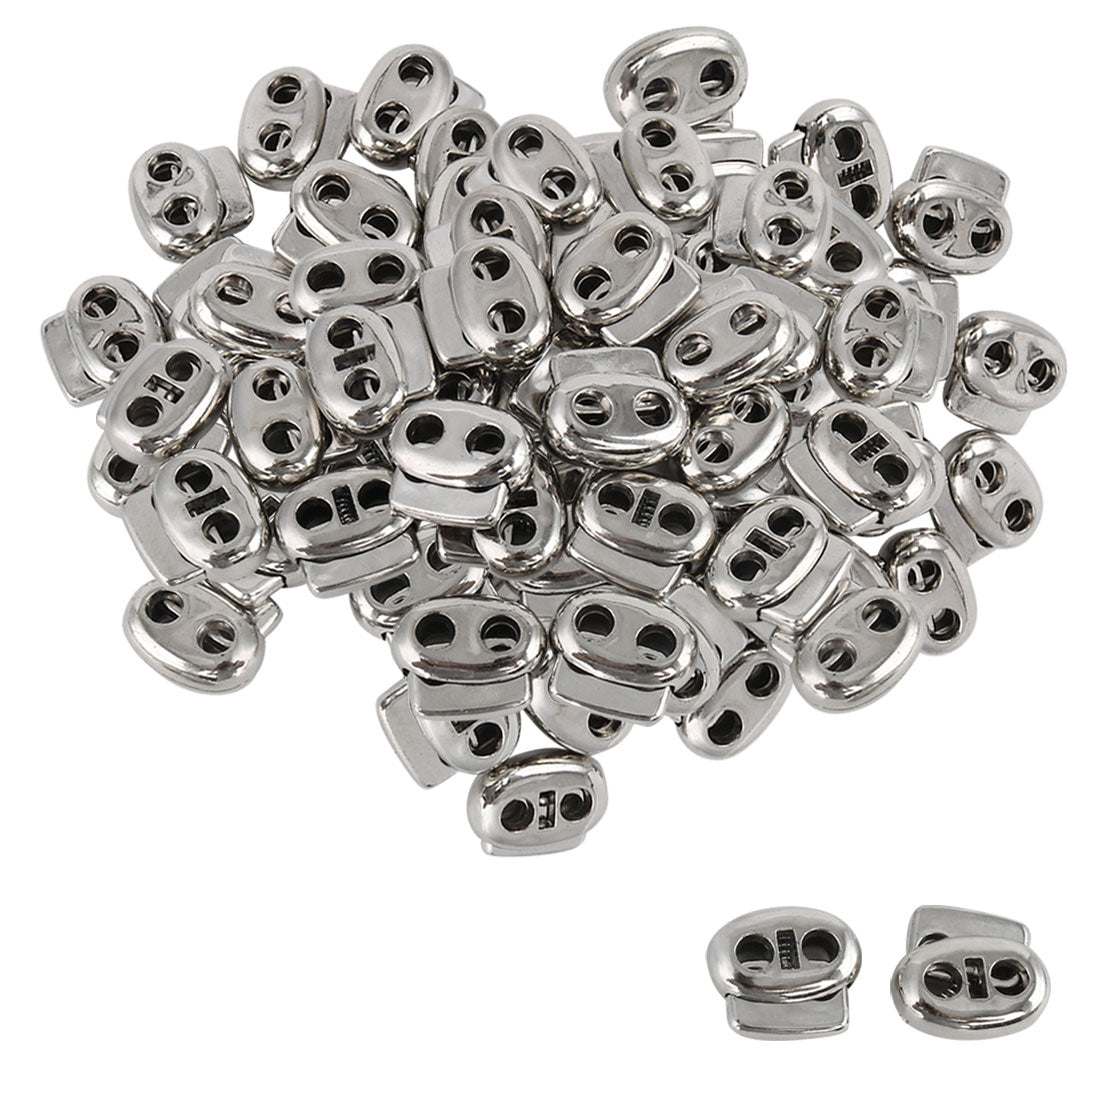 uxcell Uxcell 100 Pcs Plastic Cord Locks Double Hole End Spring Stopper Fastener, Silver Tone